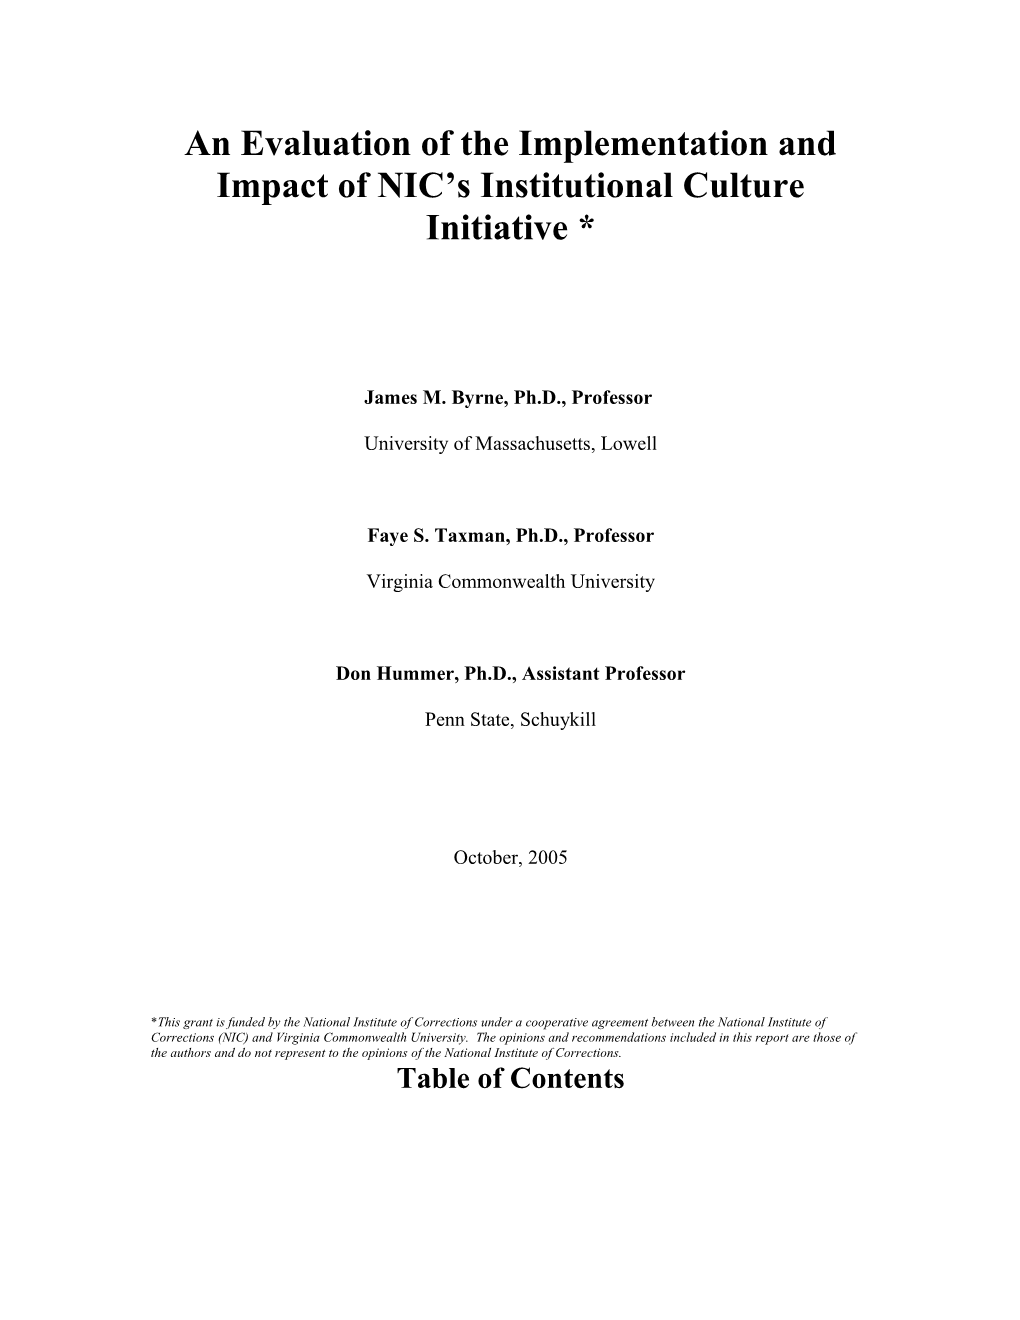 An Evaluation of the NIC Institutional Culture Initiative: Year 2 Update